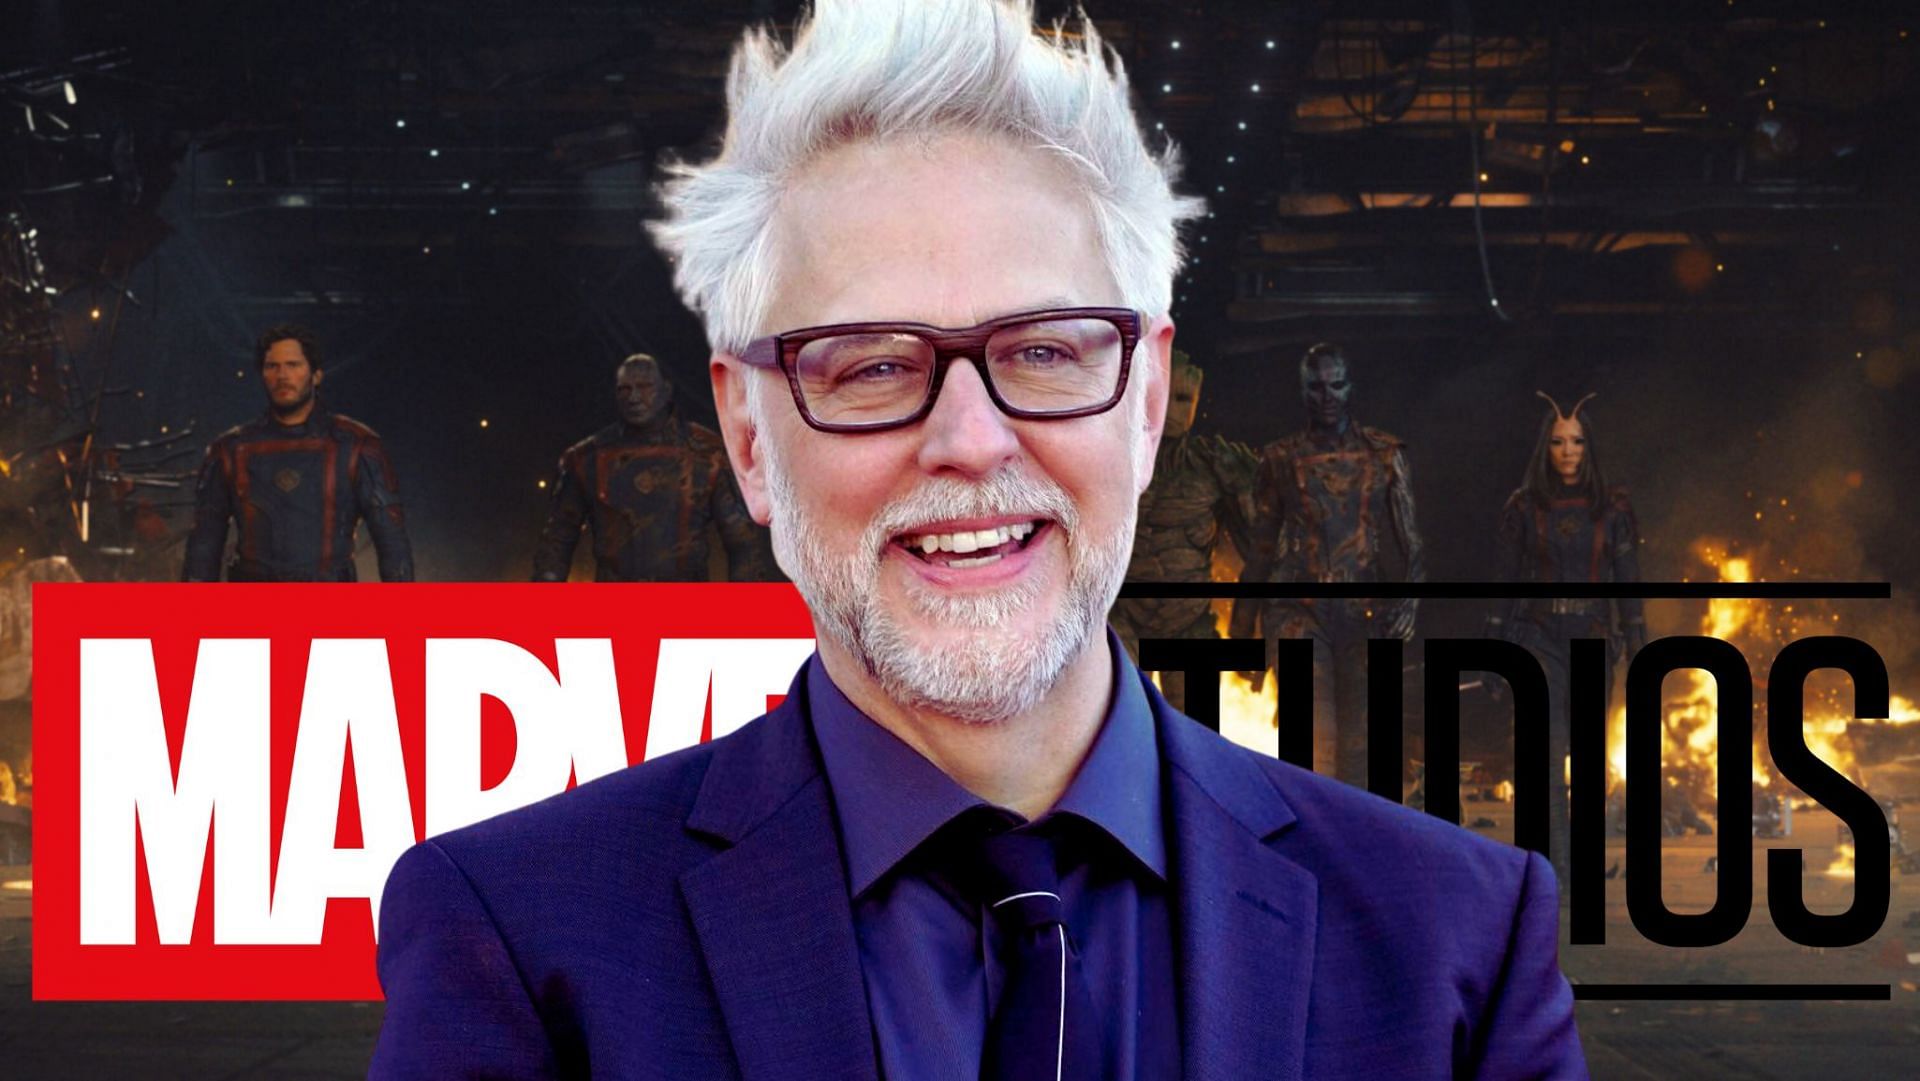 Director James Gunn has confirmed that Guardians of the Galaxy Vol. 3 will have two post-credit scenes, setting the stage for the franchise